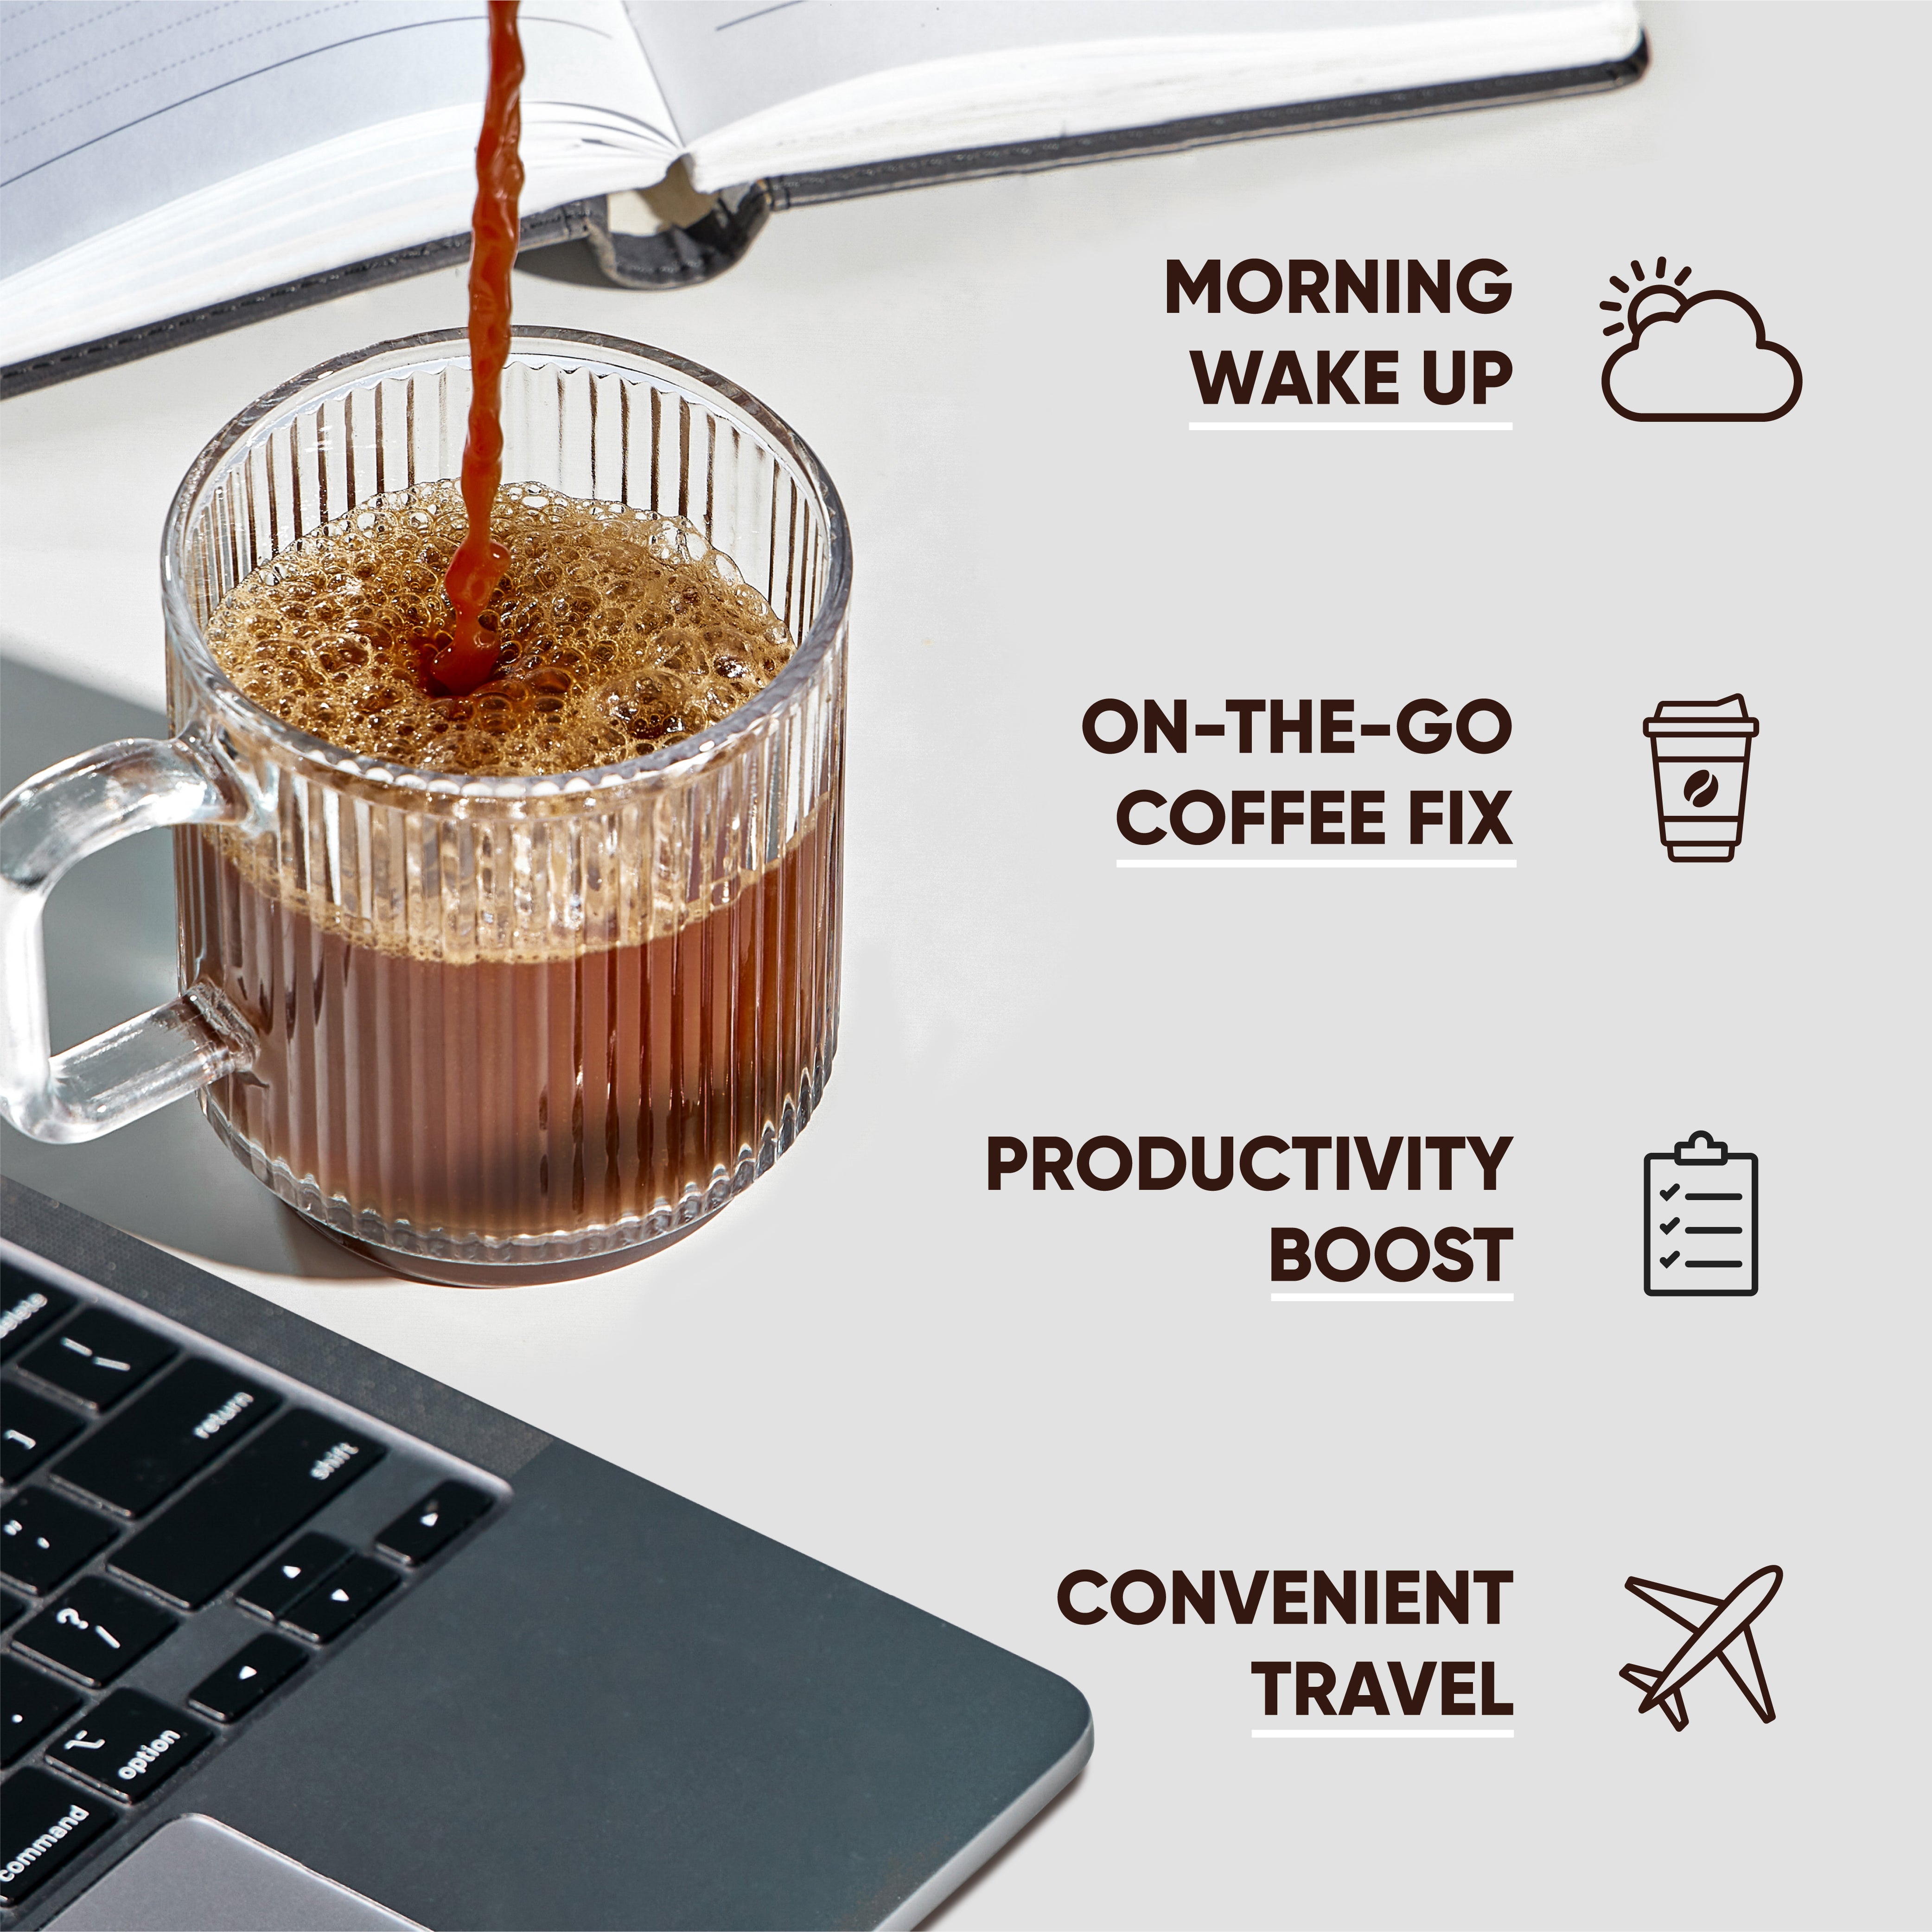 IQJOE Toasted Hazelnut Instant Coffee is great for: walking up in the morning, on-the-go coffee, productivity boost, convenient travel.